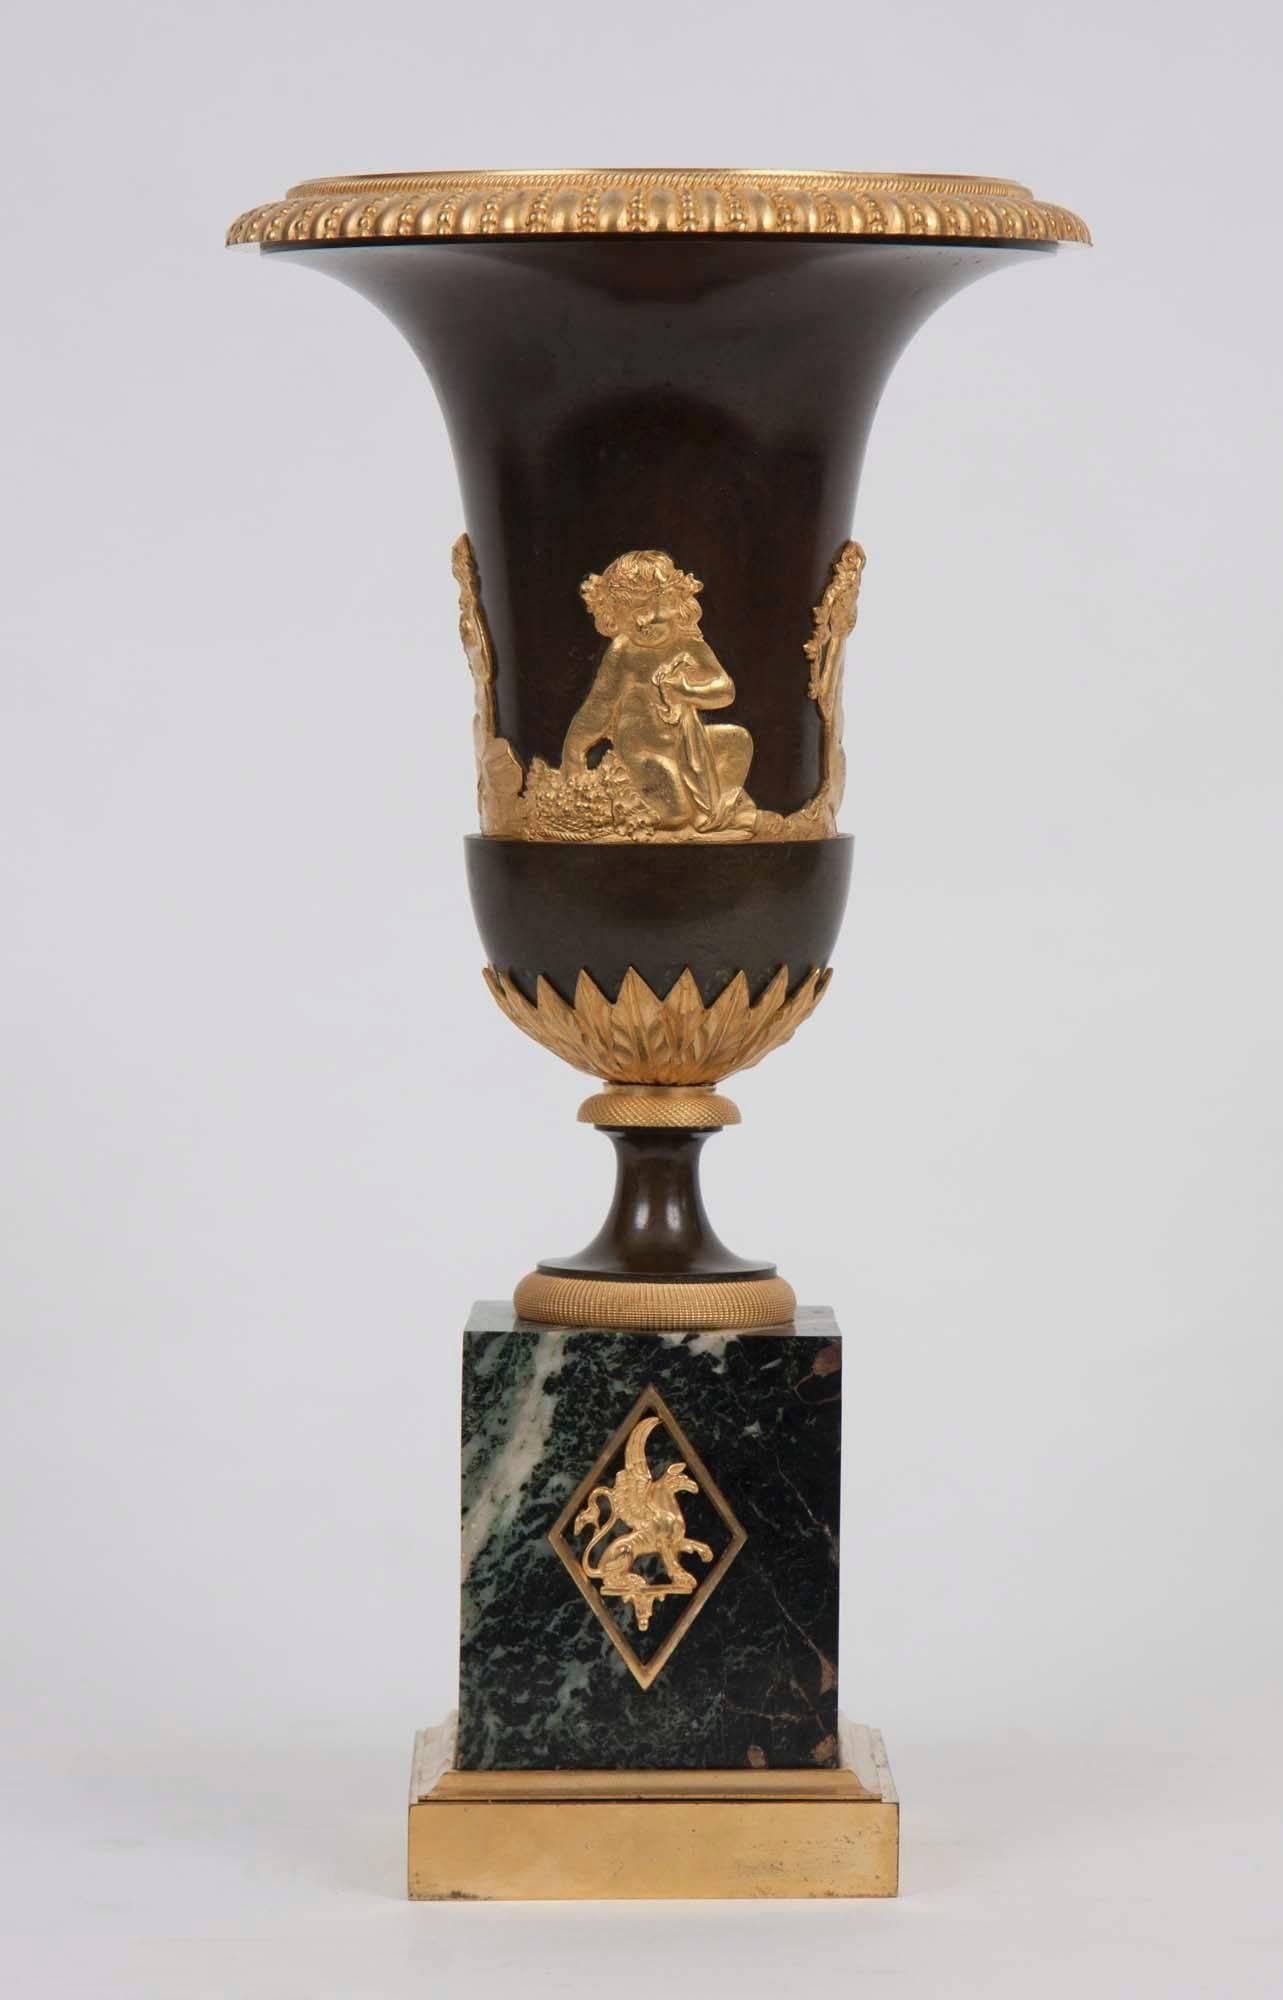 French Pair of Directorie Gilt Bronze-Mounted Urns